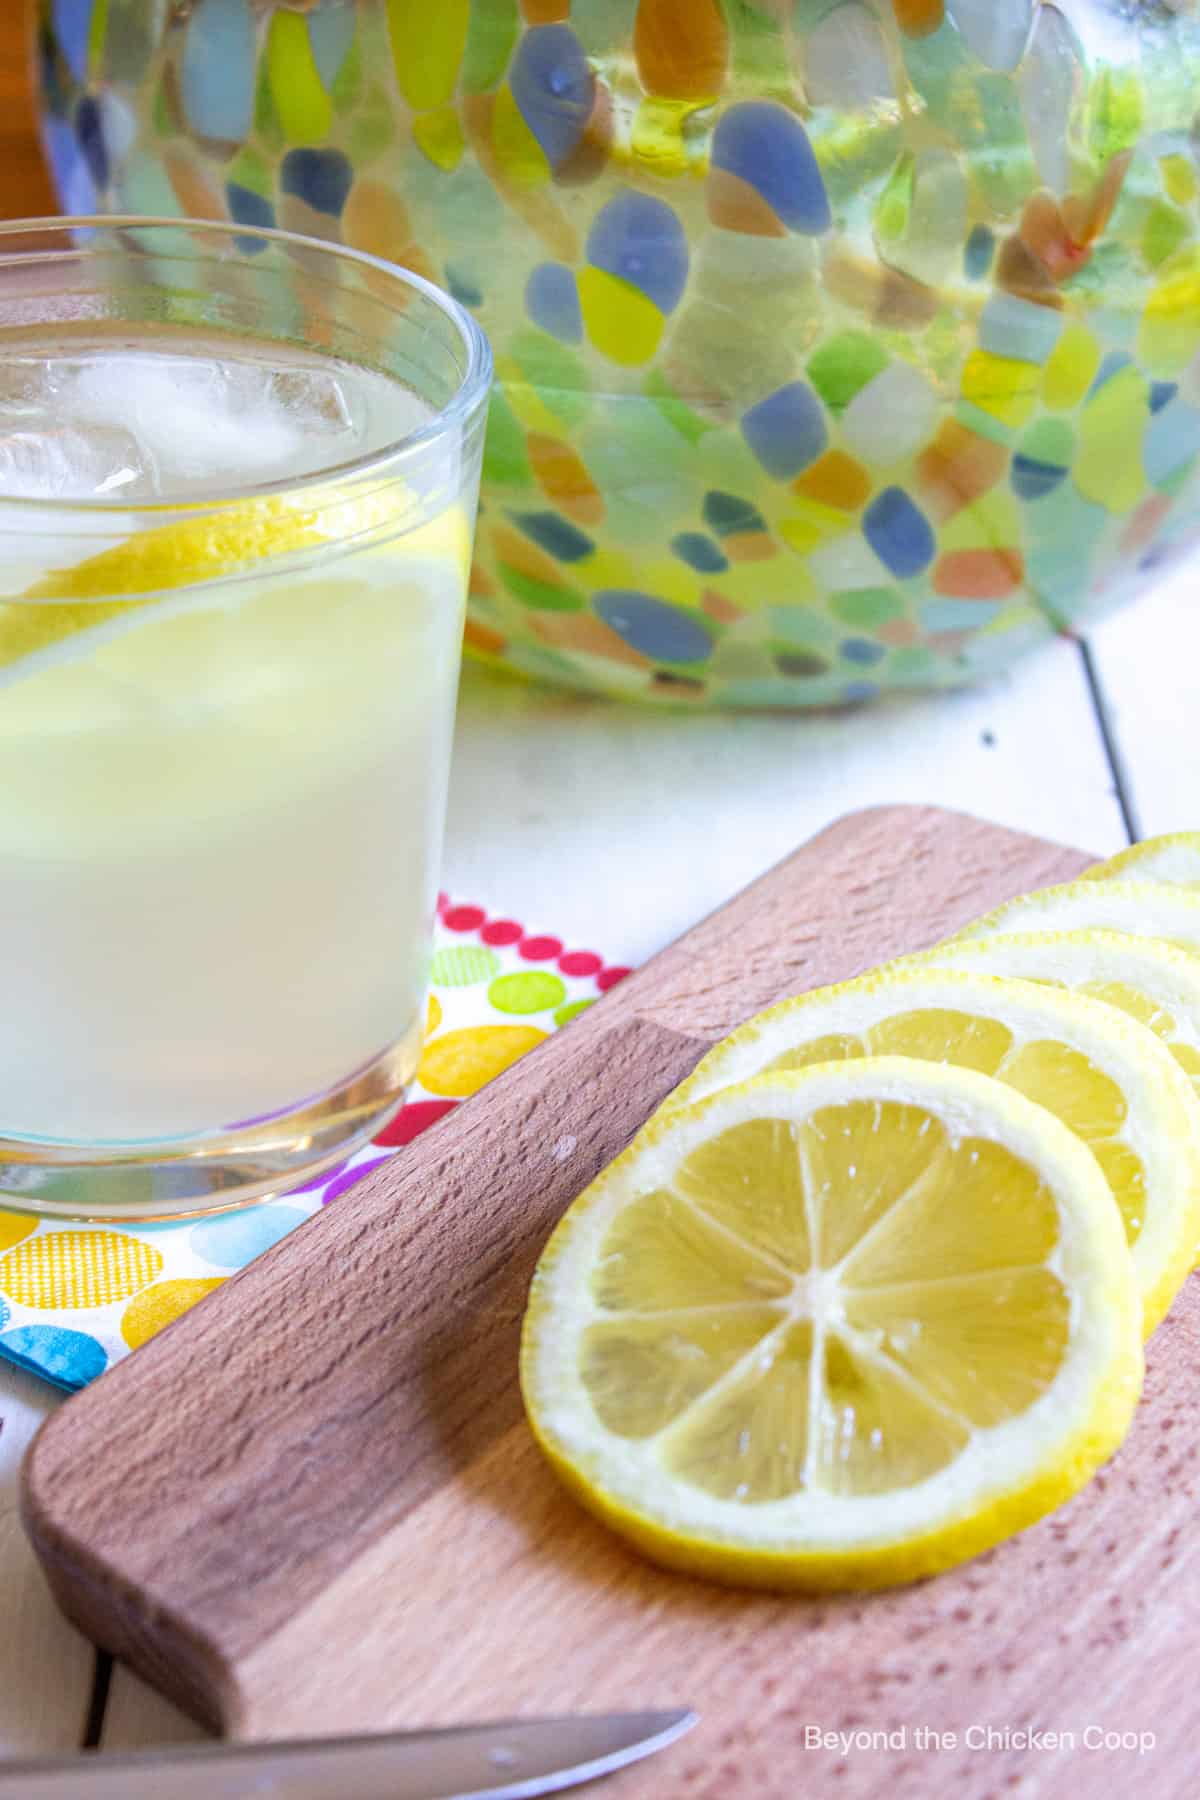 Lemon slices on a cutting board next to a glass of lemonade.